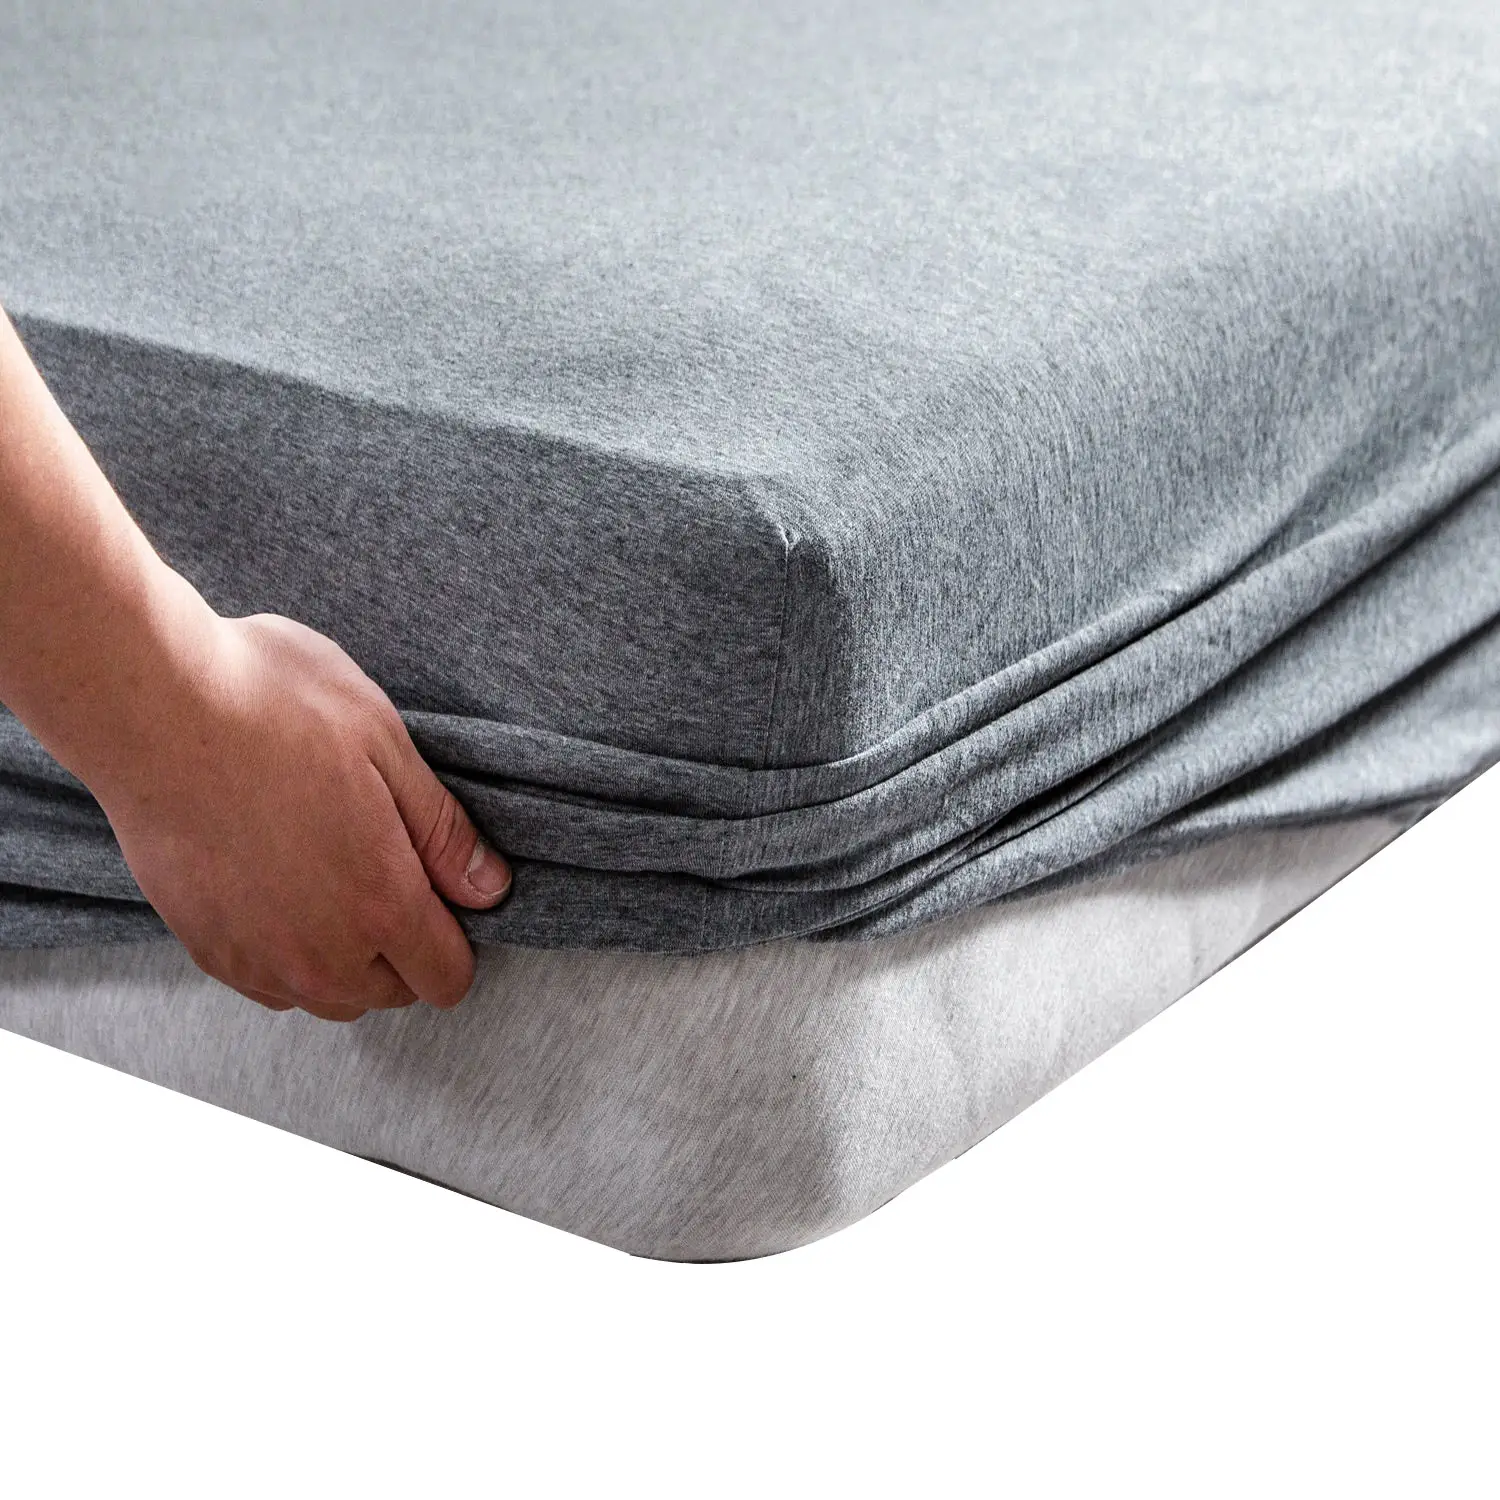 Wholesale stretch 100% cotton jersey knit fitted bottom sheet with extra deep pocket fitted sheet up to 15" to 20"